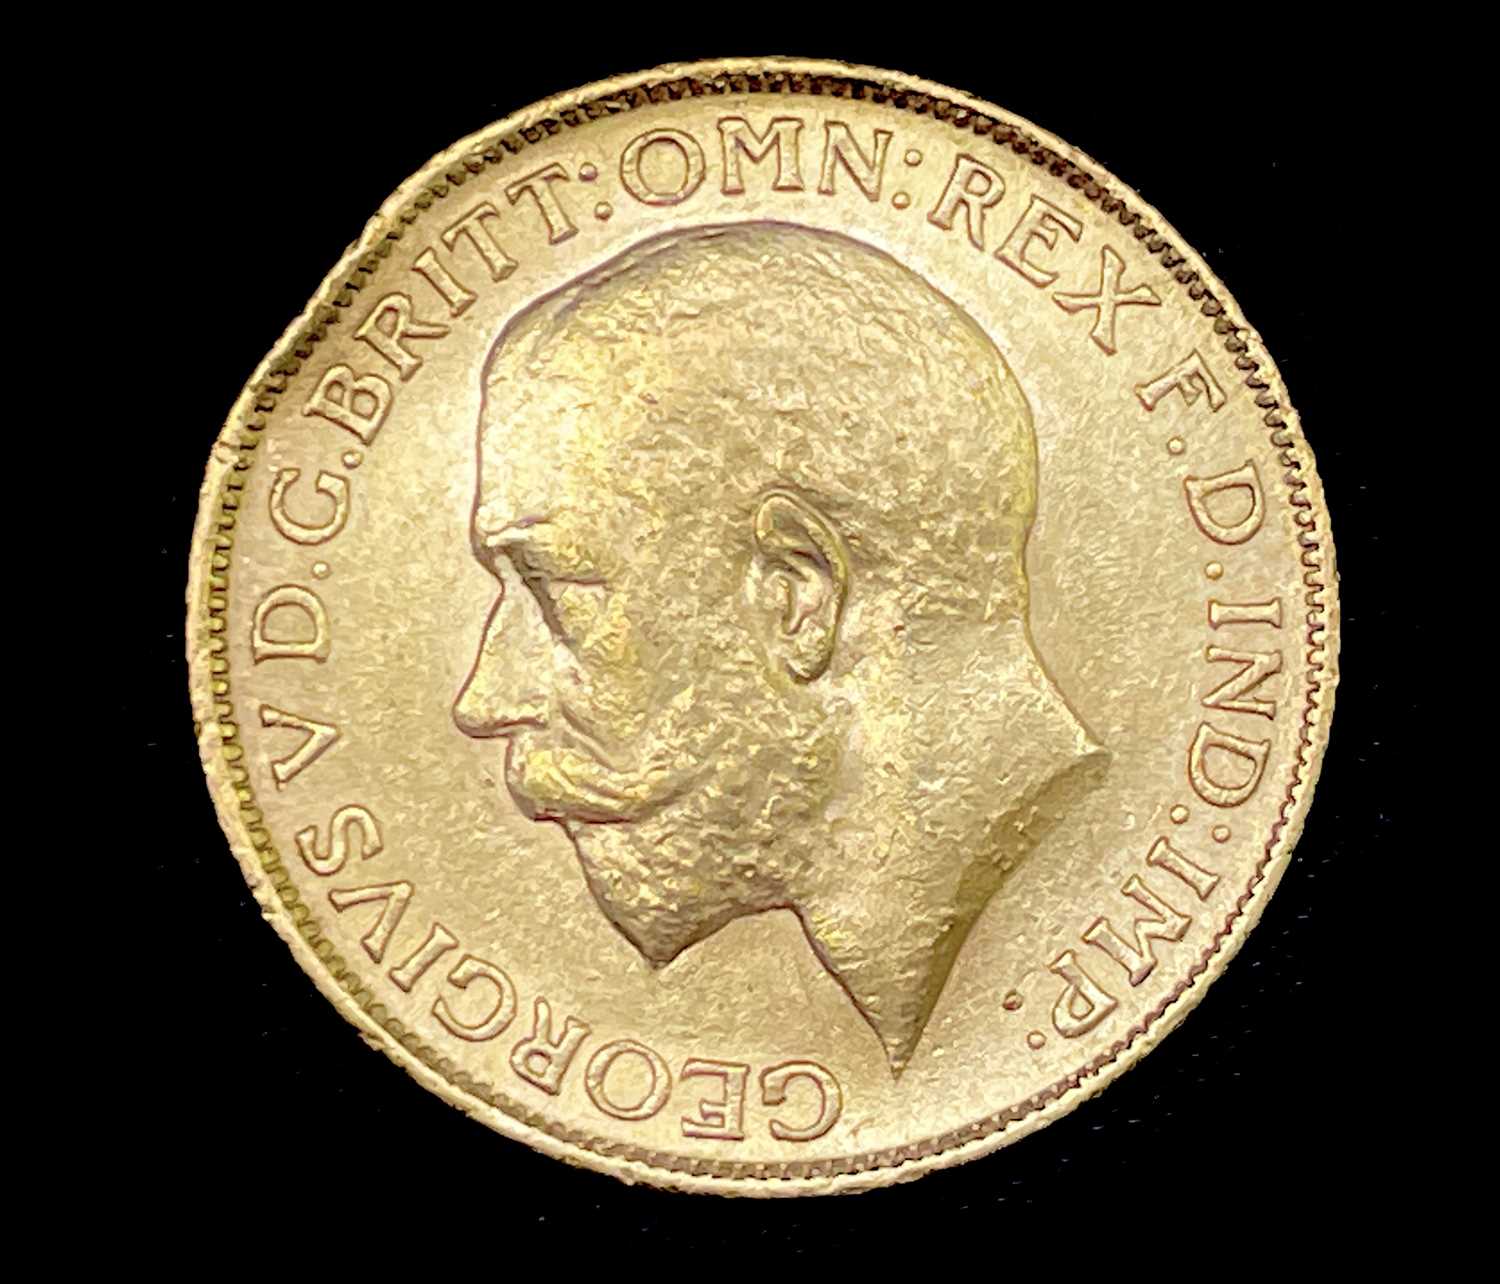 Great Britain Gold Sovereign 1912 slight EK George V Condition: please request a condition report if - Image 2 of 2